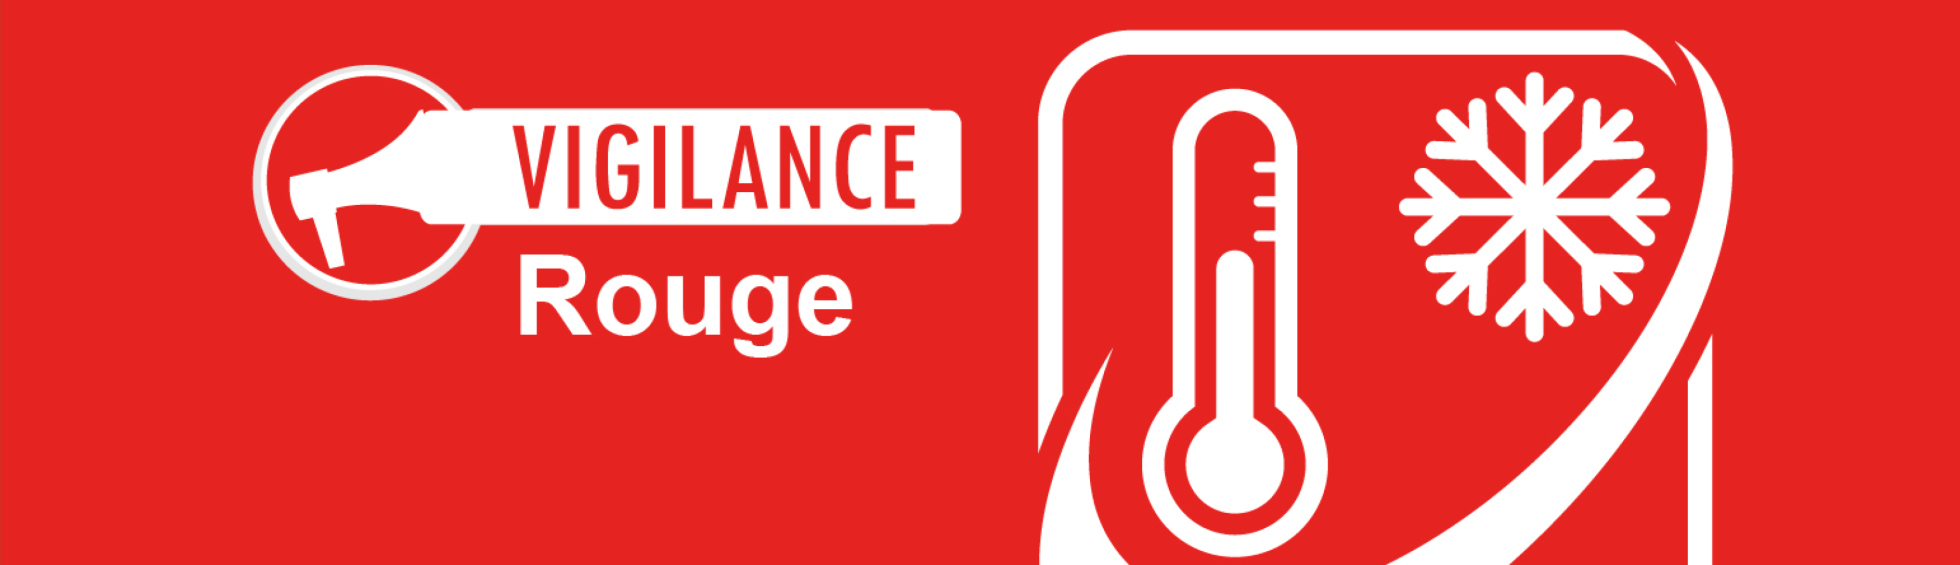 Vigilance Rouge - Grand froid